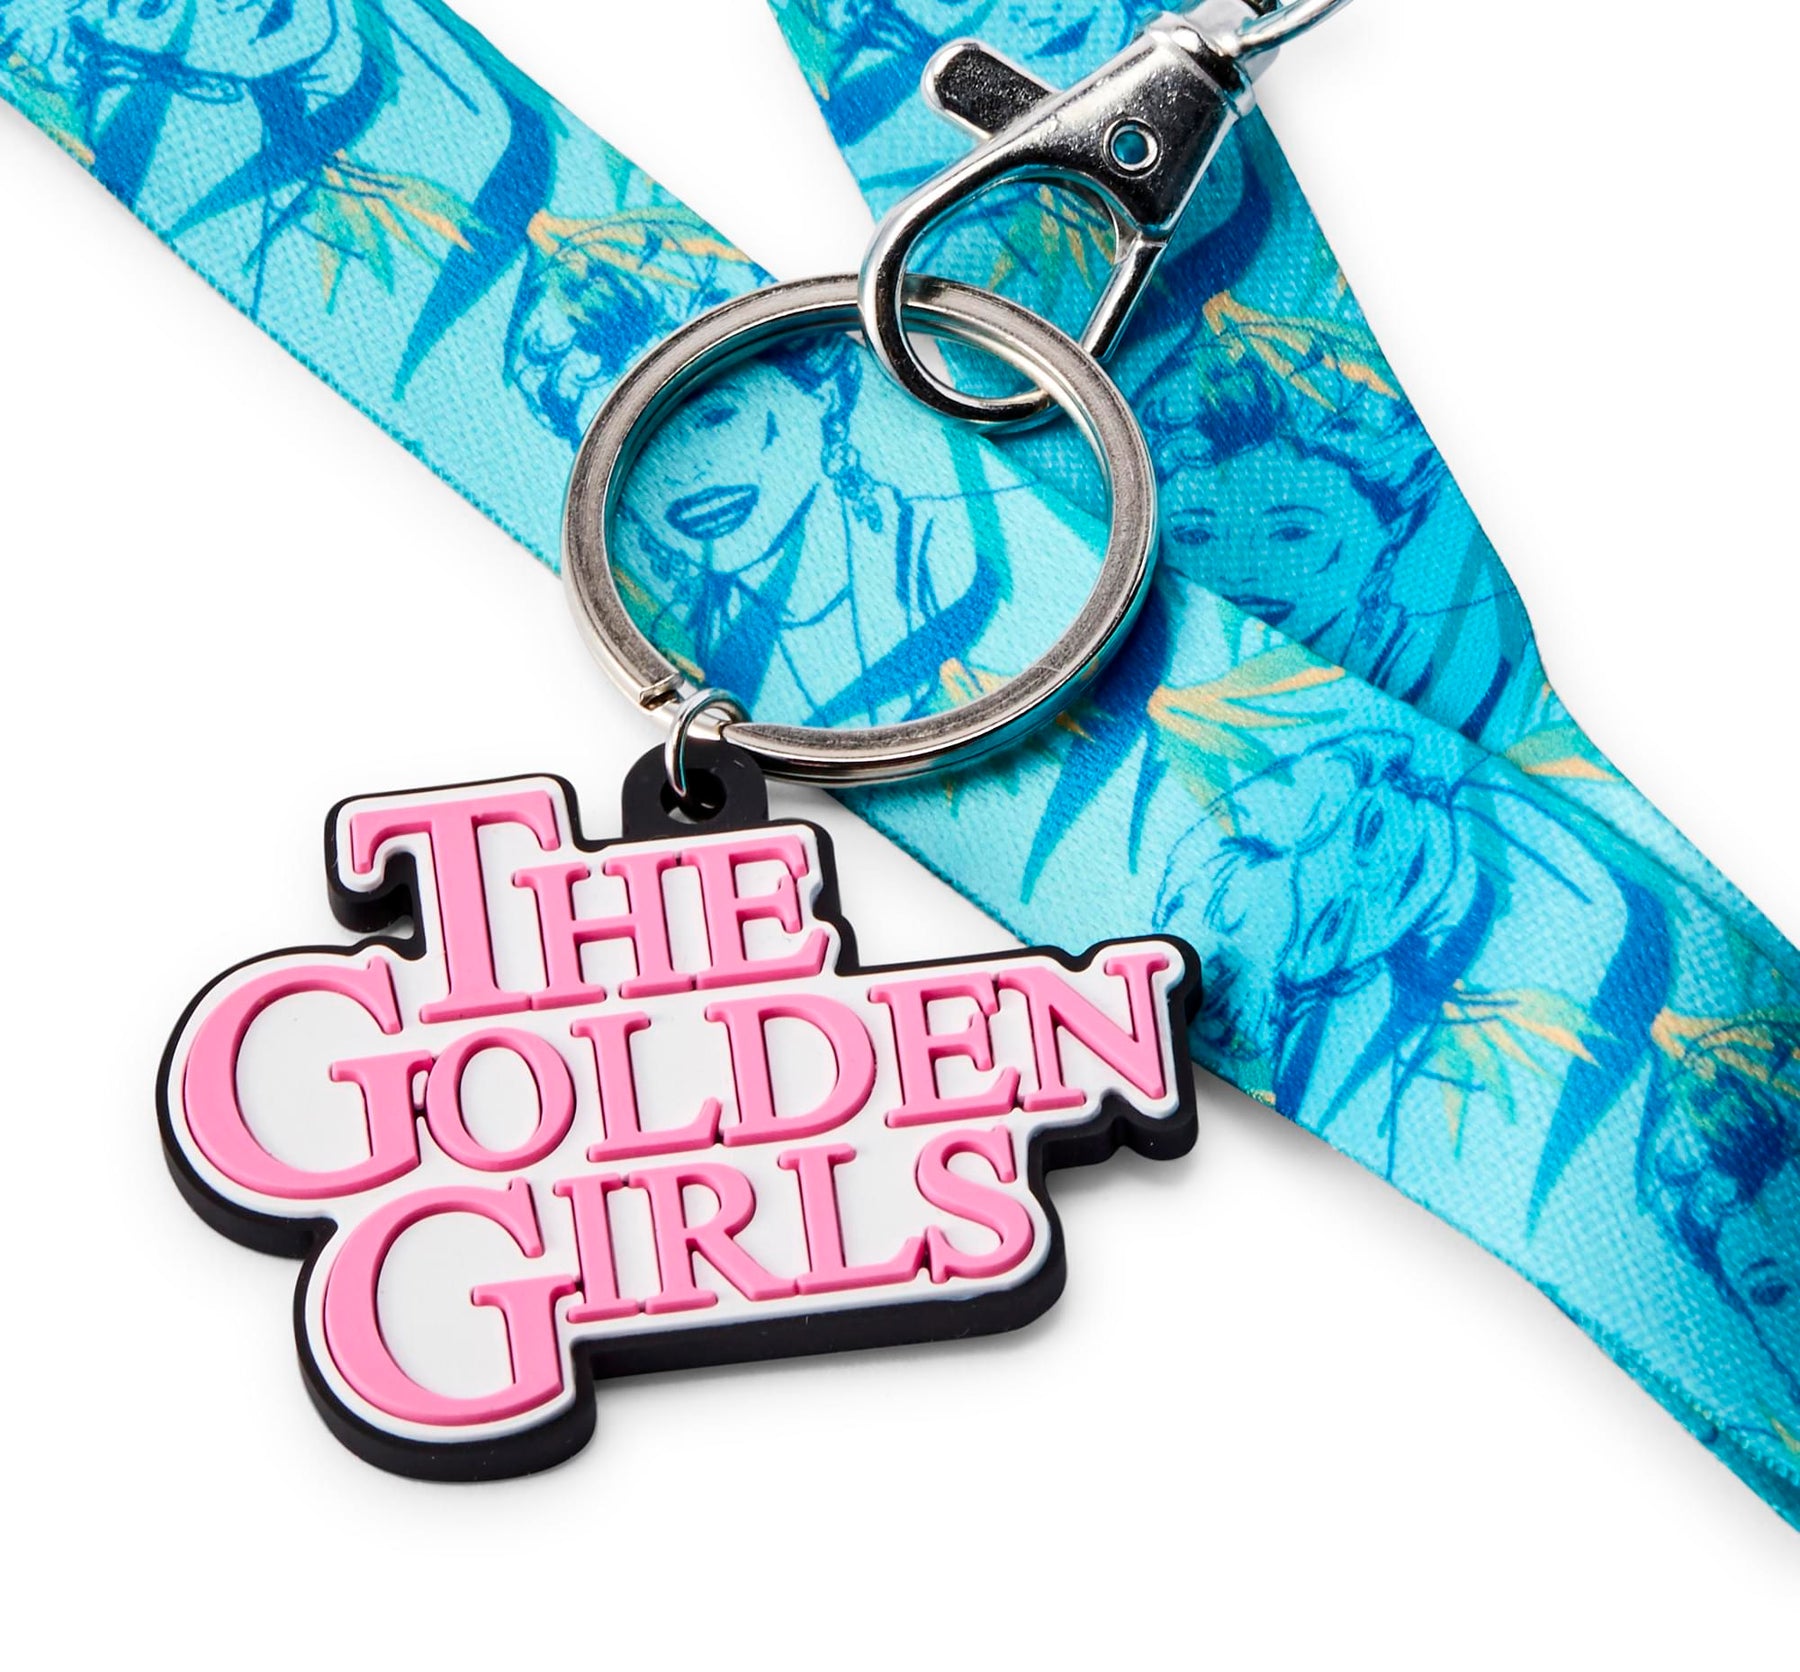 The Golden Girls Scented Break-Away Lanyard With Charm | Lavender Scented